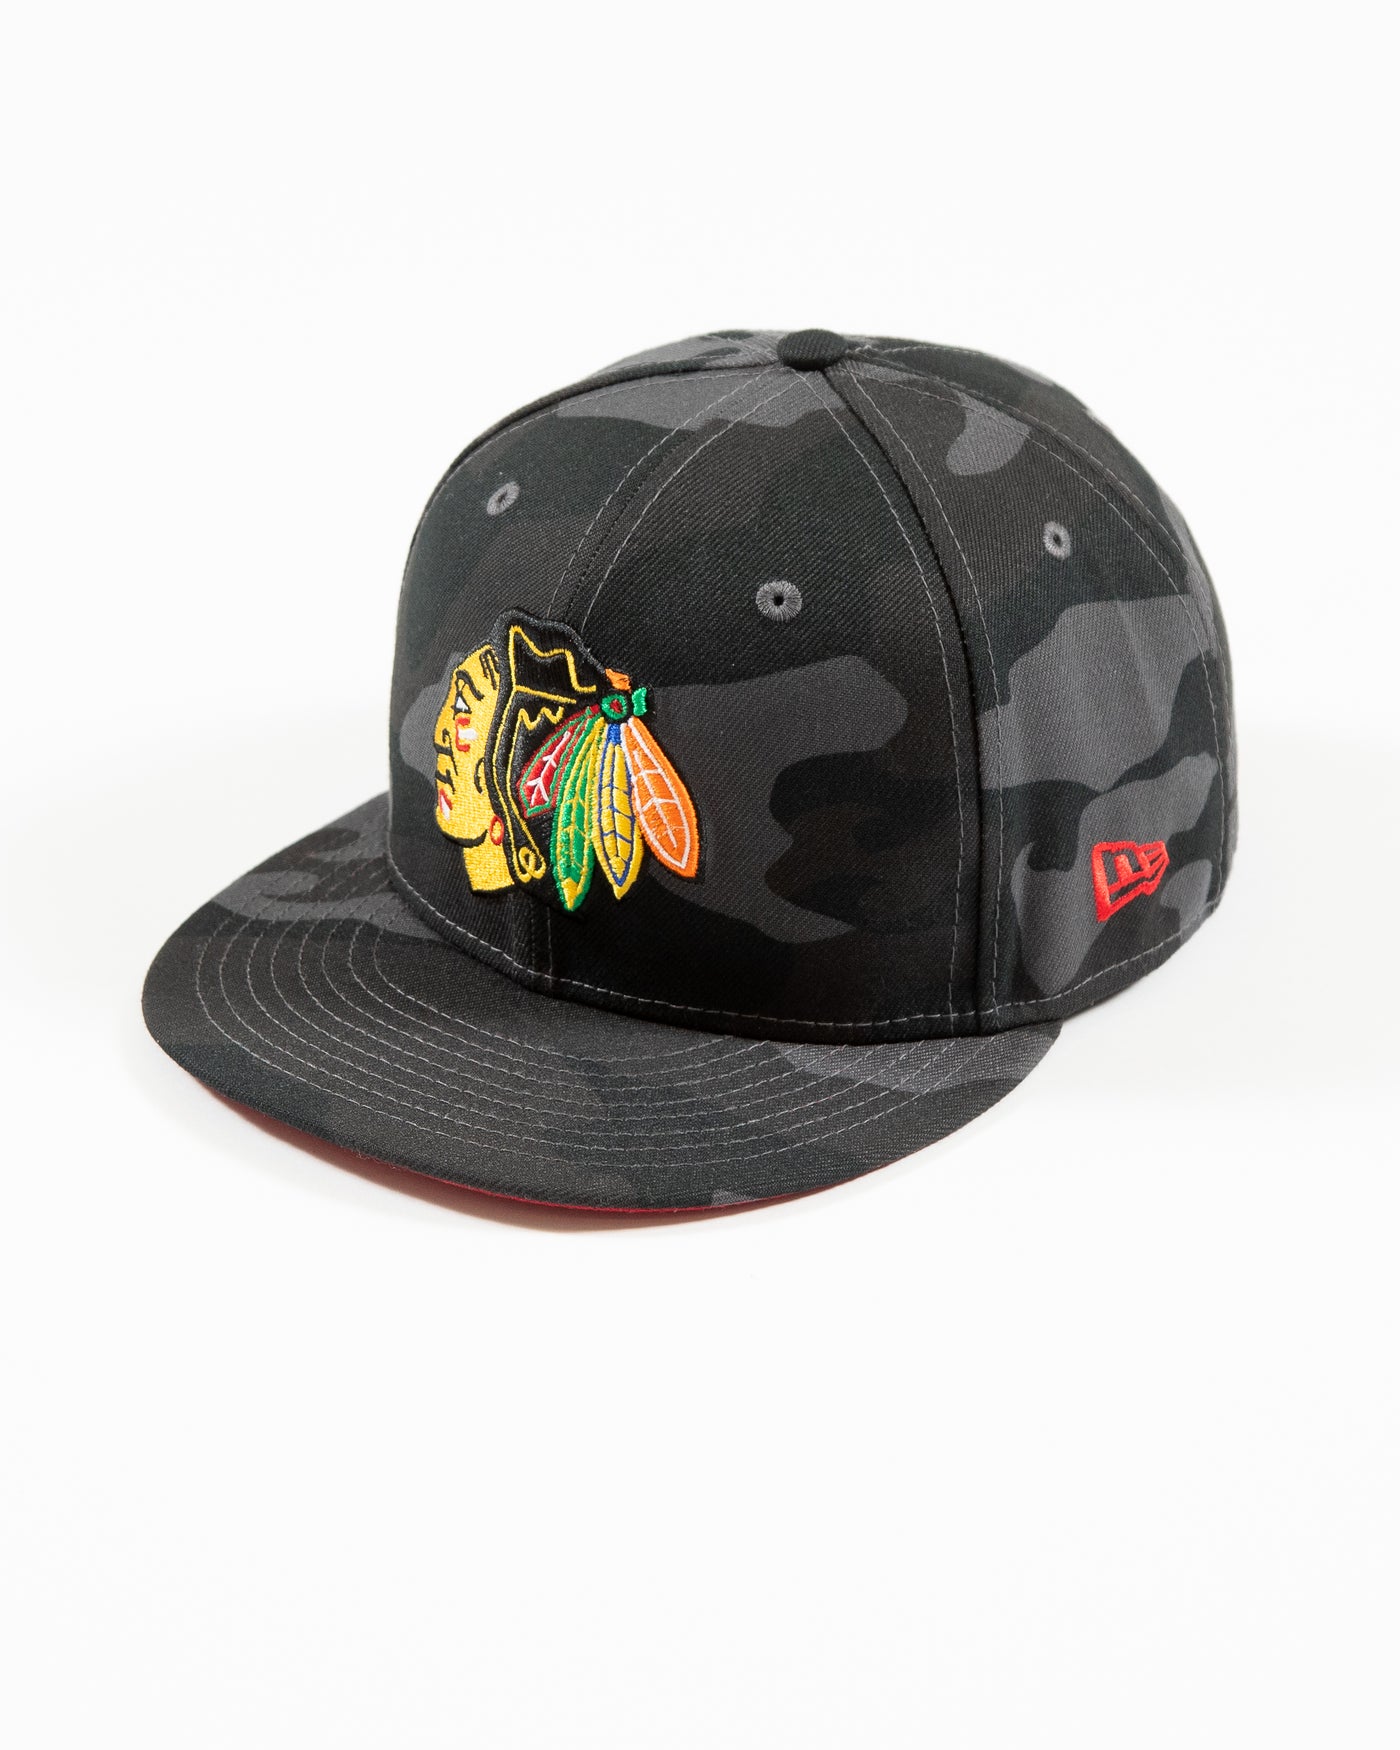 New Era black camo 59FIFTY fitted cap with Chicago Blackhawks primary logo embroidered on front - left angle lay flat